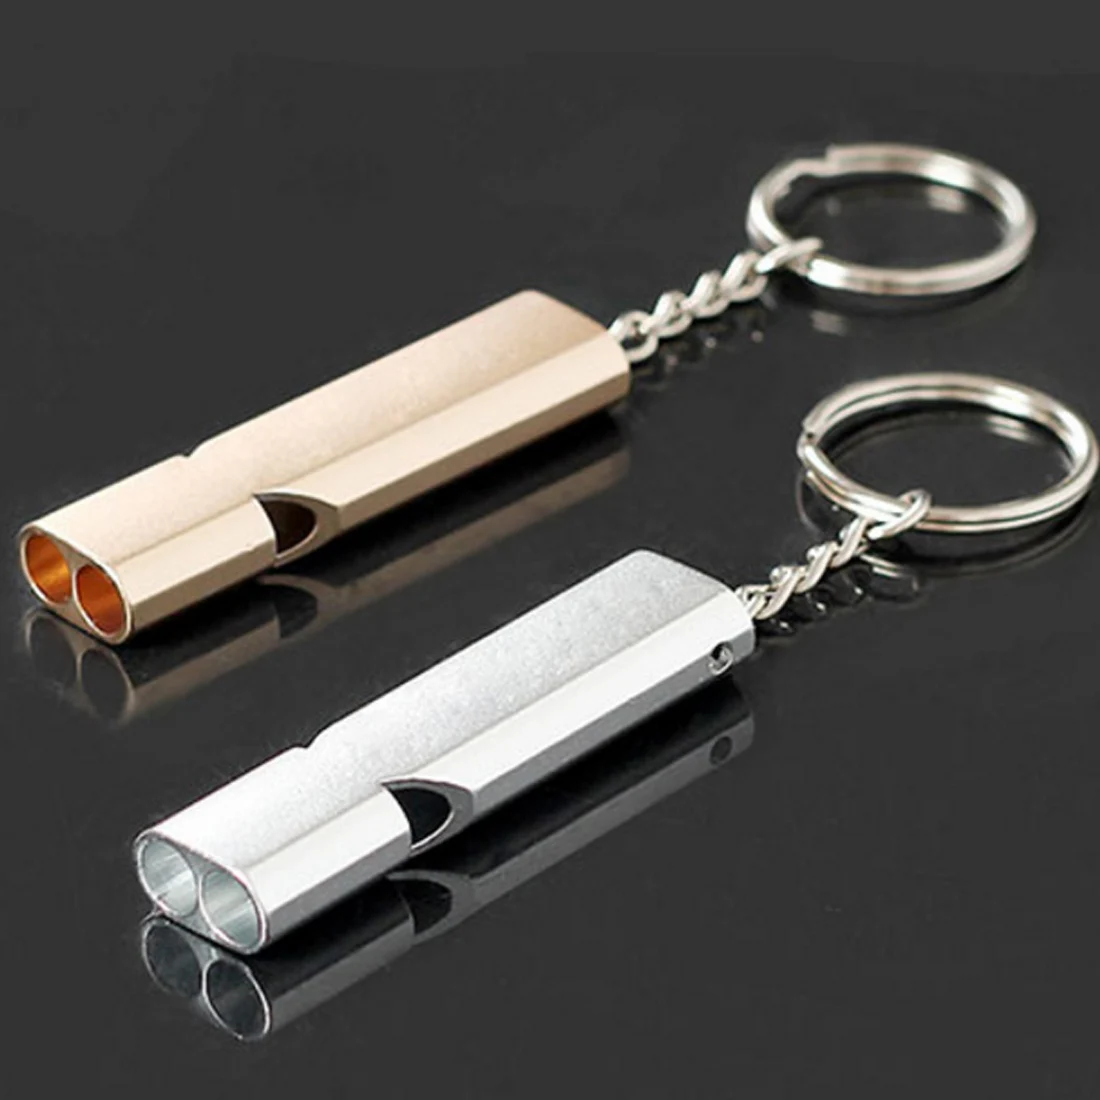 Hot Sell 1Pcs Whistle Keychain Outdoor Survival Whistle Double Pipe High Decibel Outdoor Emergency Whistle Keychains